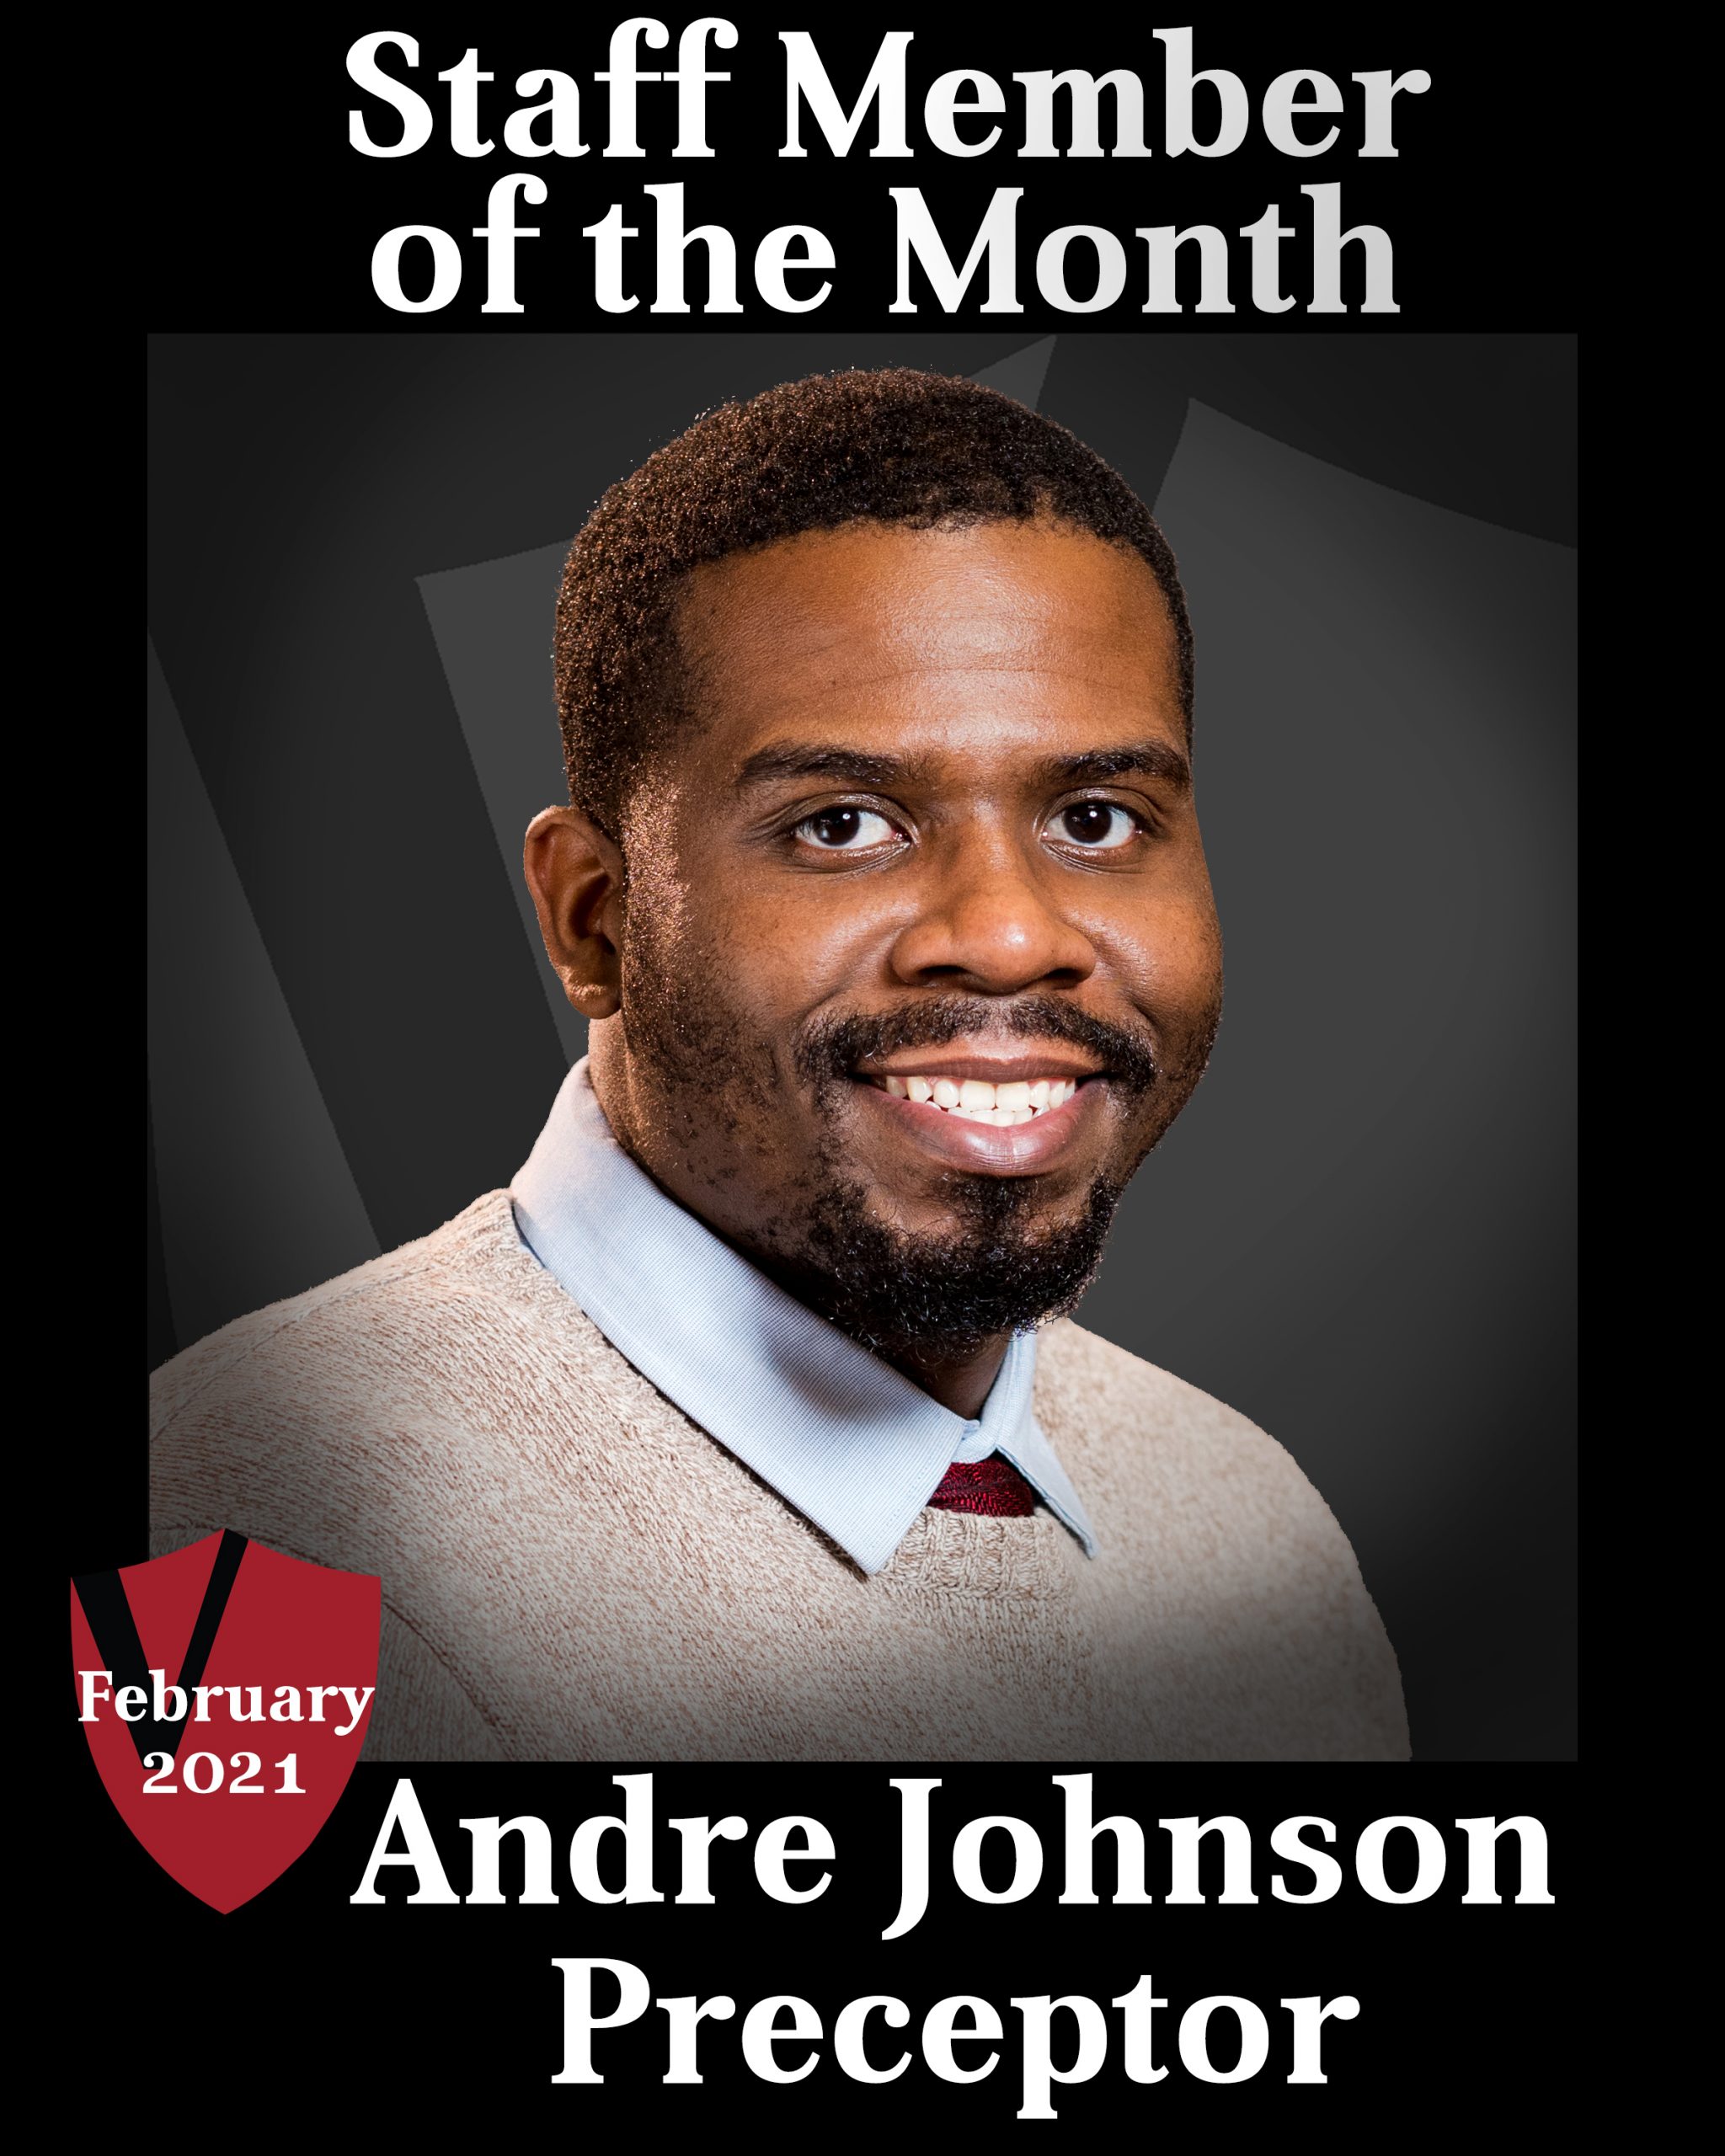 Staff Member of the Month - February 2021